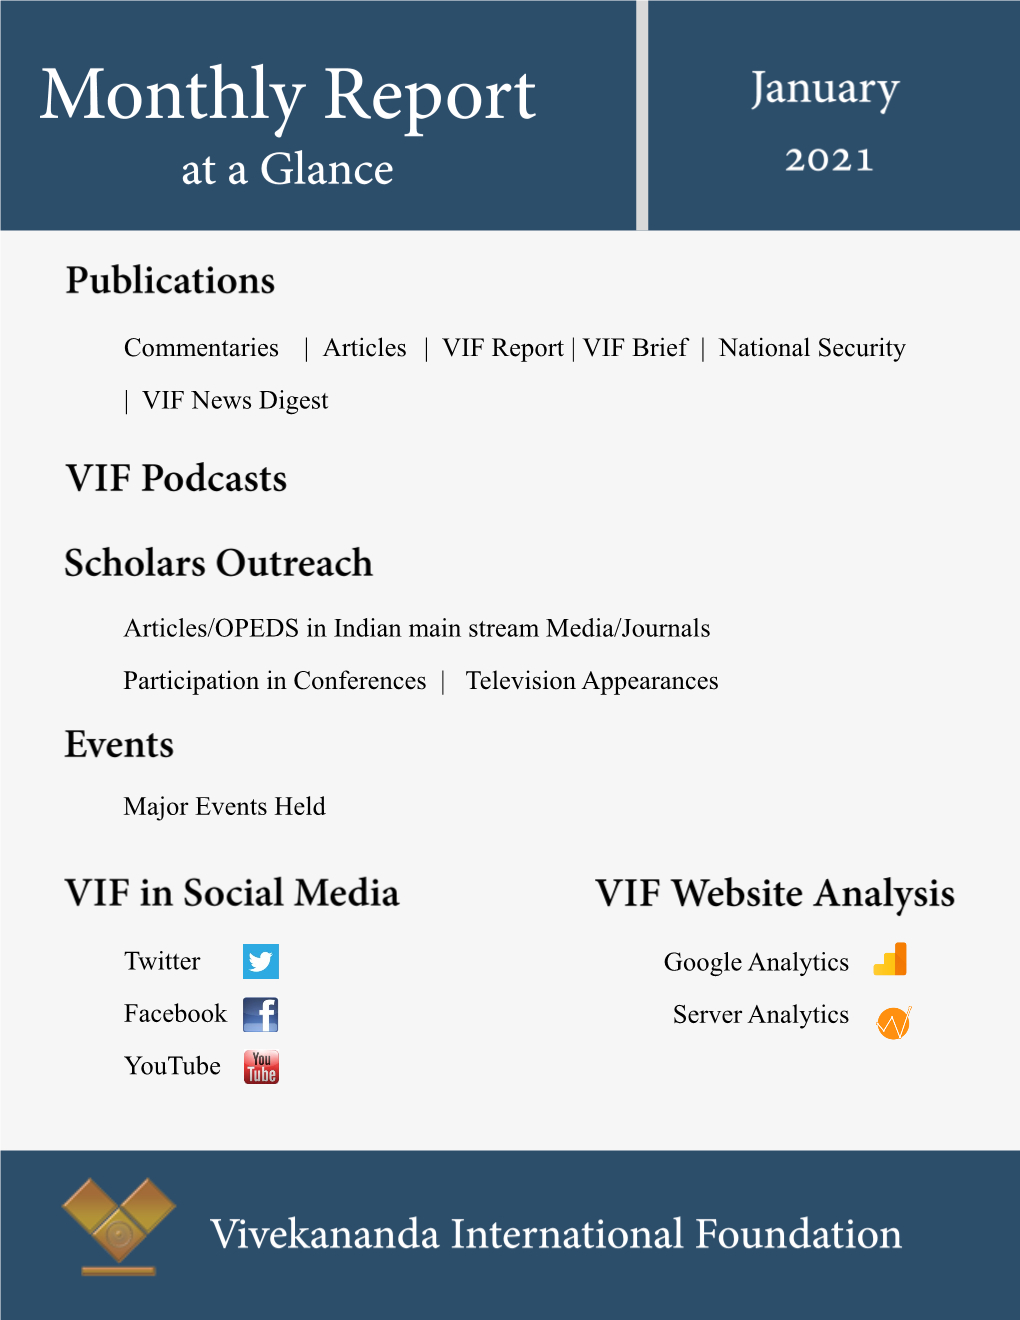 Twitter Facebook Youtube Articles/OPEDS in Indian Main Stream Media/Journals Participation in Conferences | Televisio